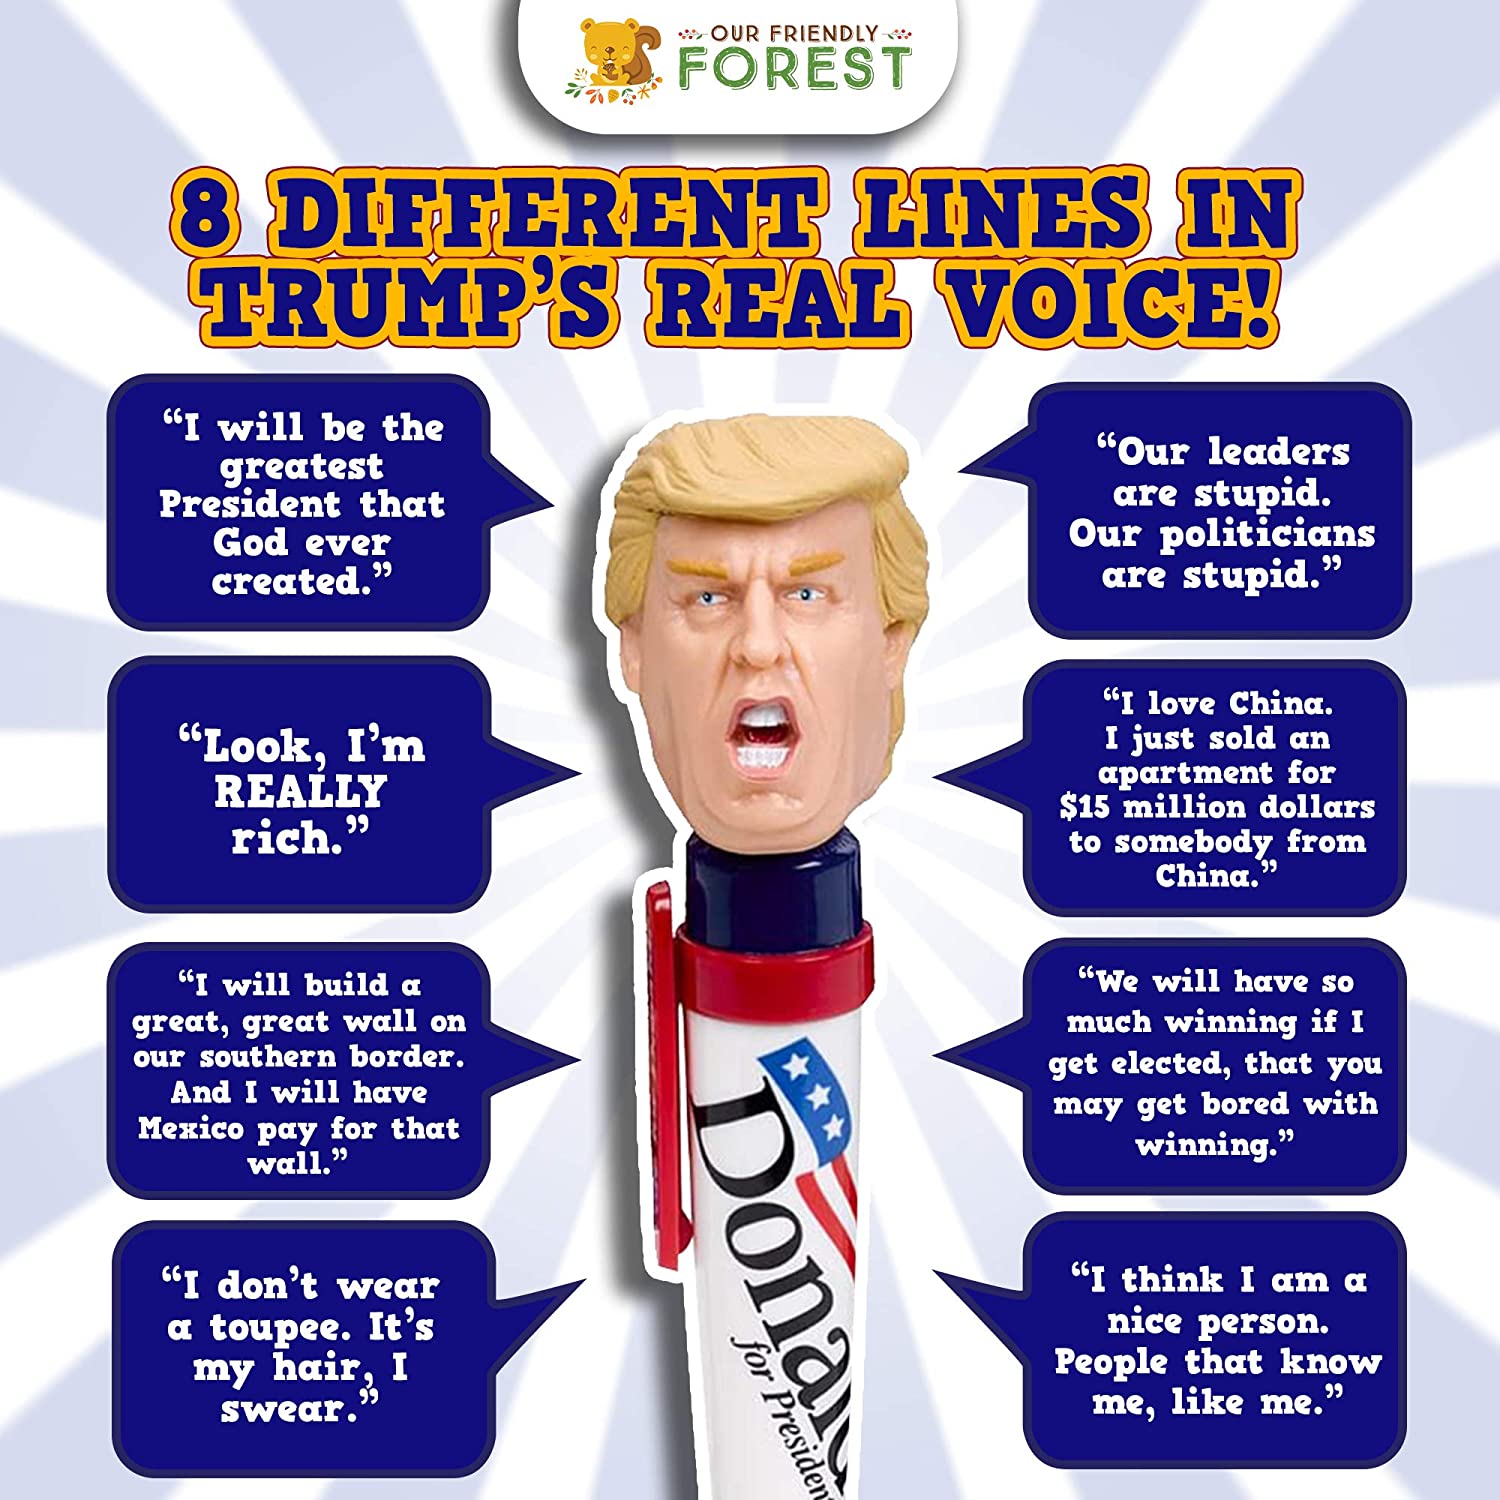 A close-up view of a Donald Trump talking pen. The text reads, "8 different lines in Trump's own voice."